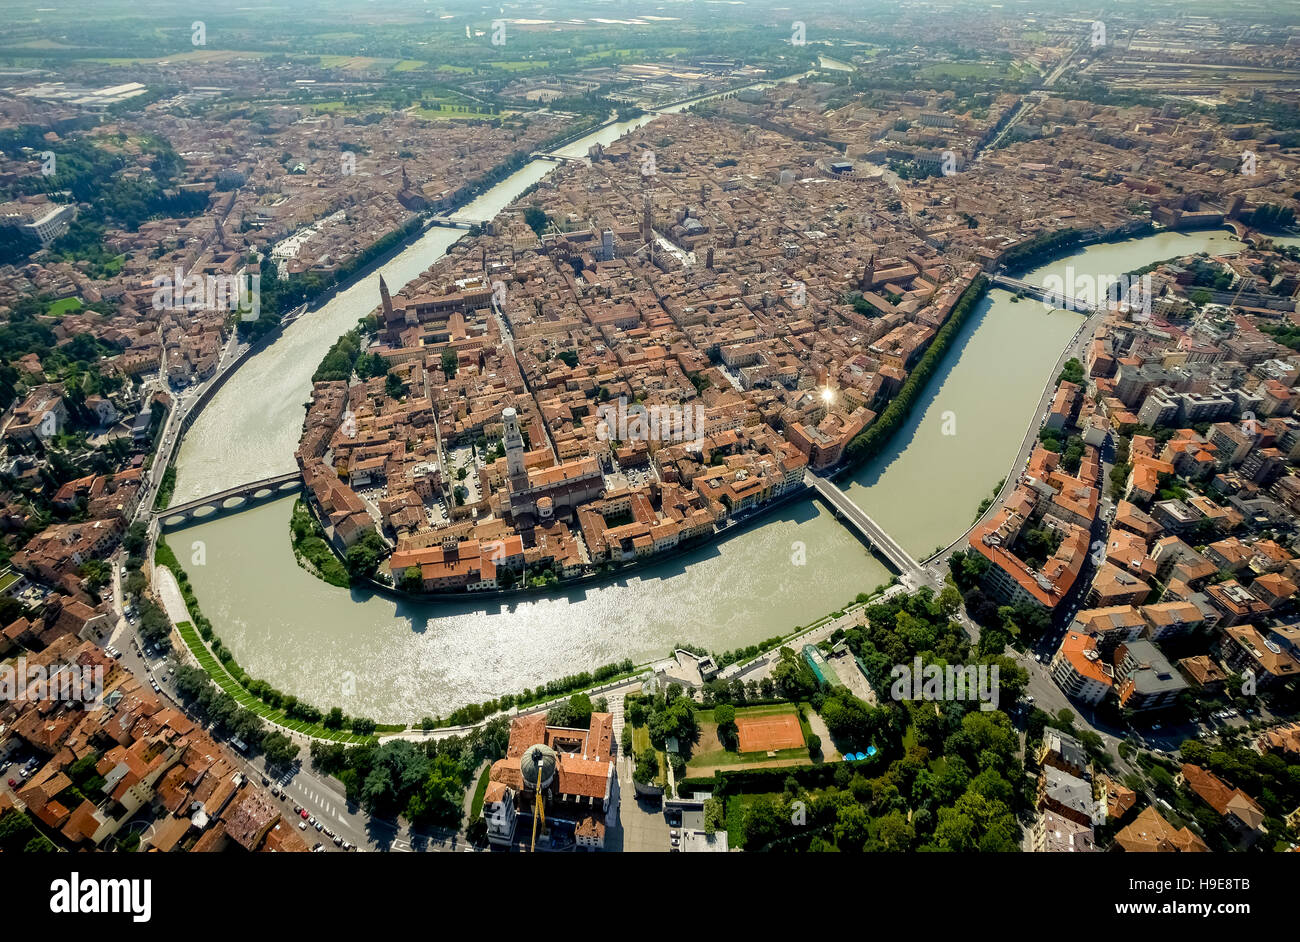 Aerial view, downtown Verona, Etsch river, Adige river bend with bridges, Verona, northern Italy, Veneto, Italy,IT Europe aerial Stock Photo